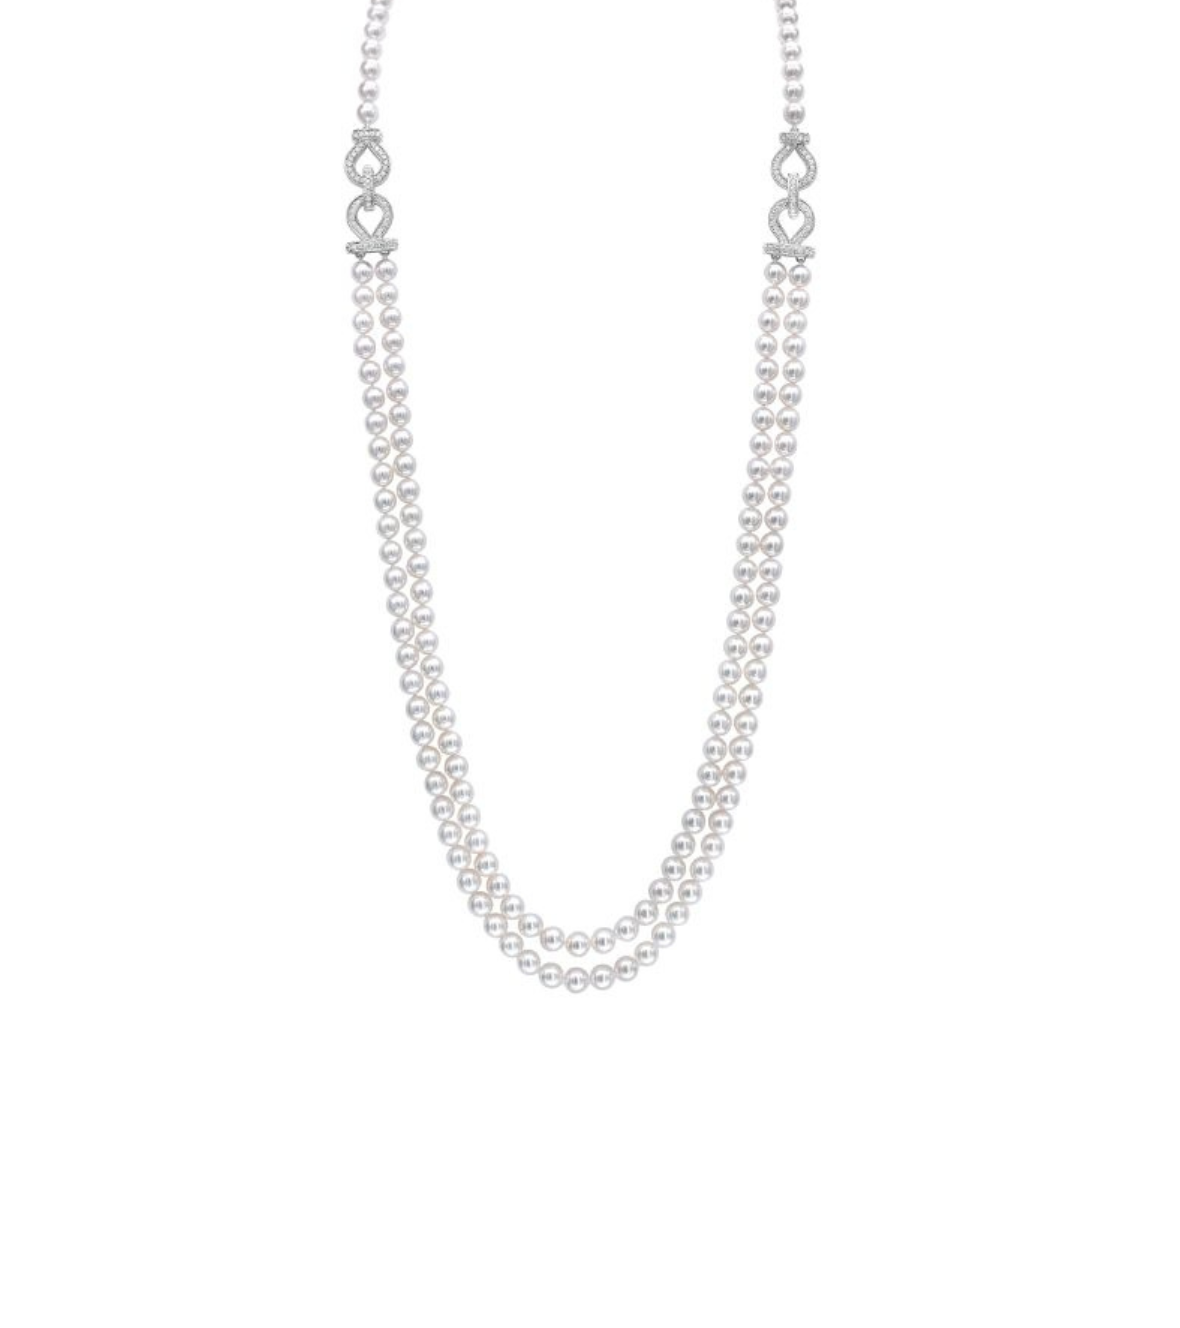 Double White Gold Motif 18k Pearl Necklace with Diamonds by Mentis Collection